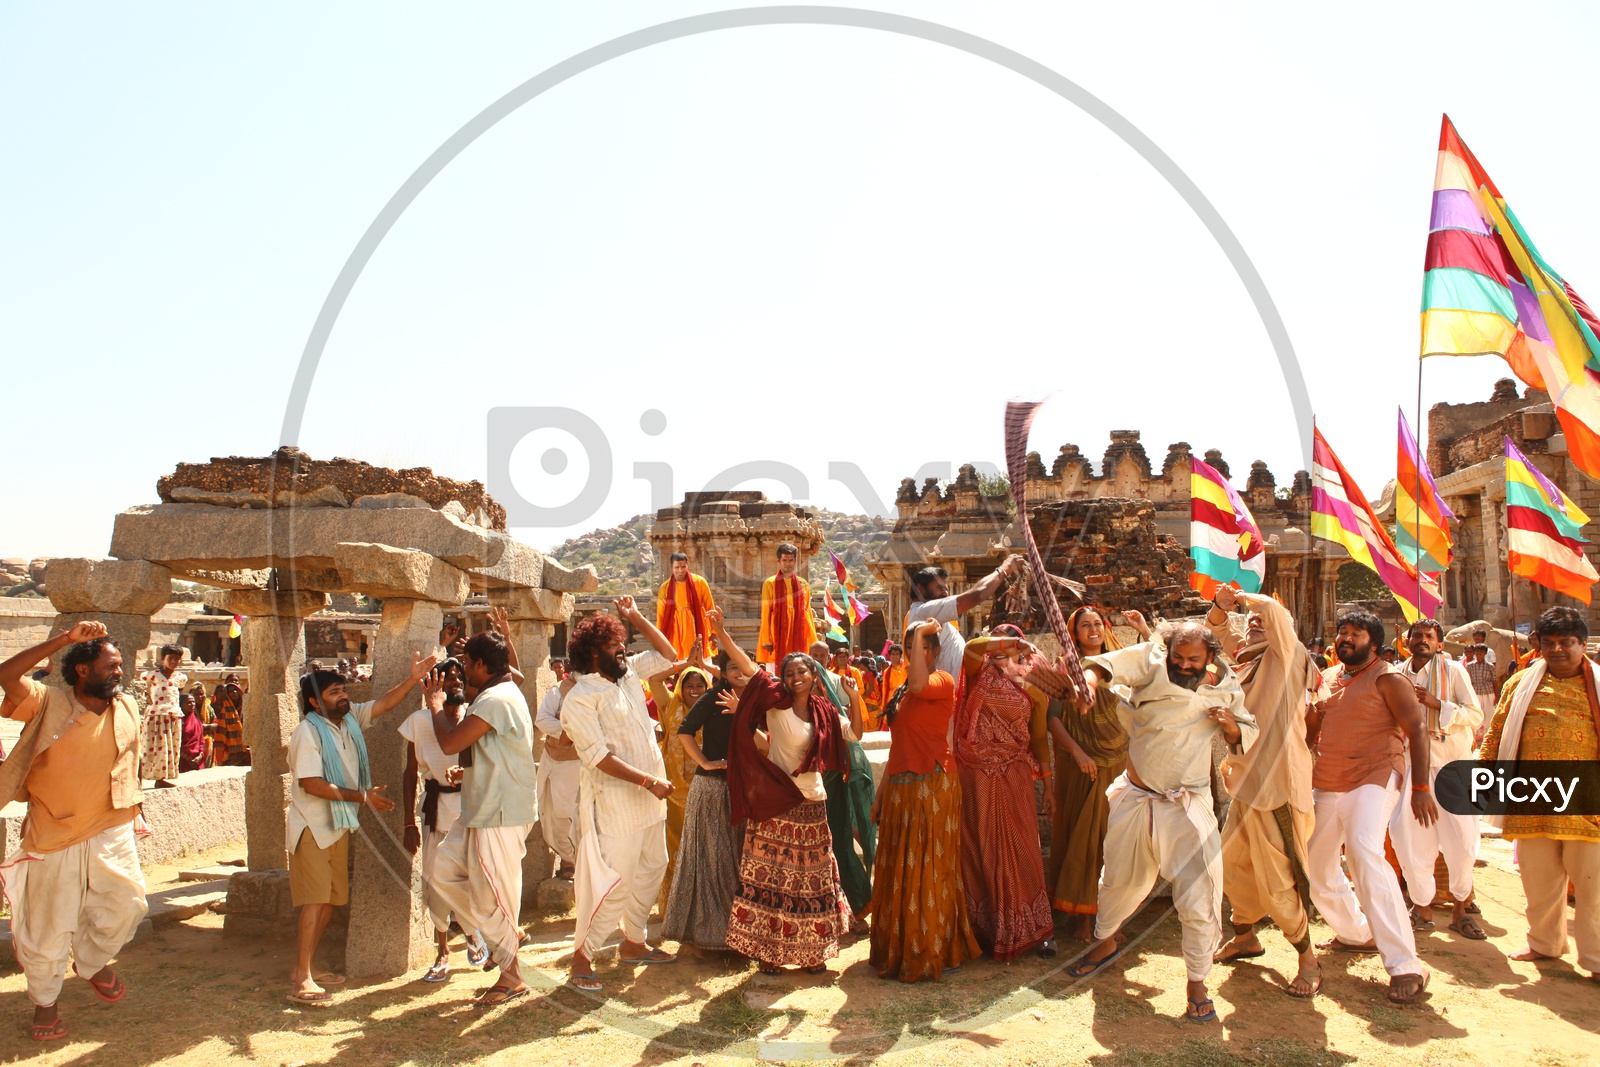 People Celebrating Local Festival in an Ancient Temple